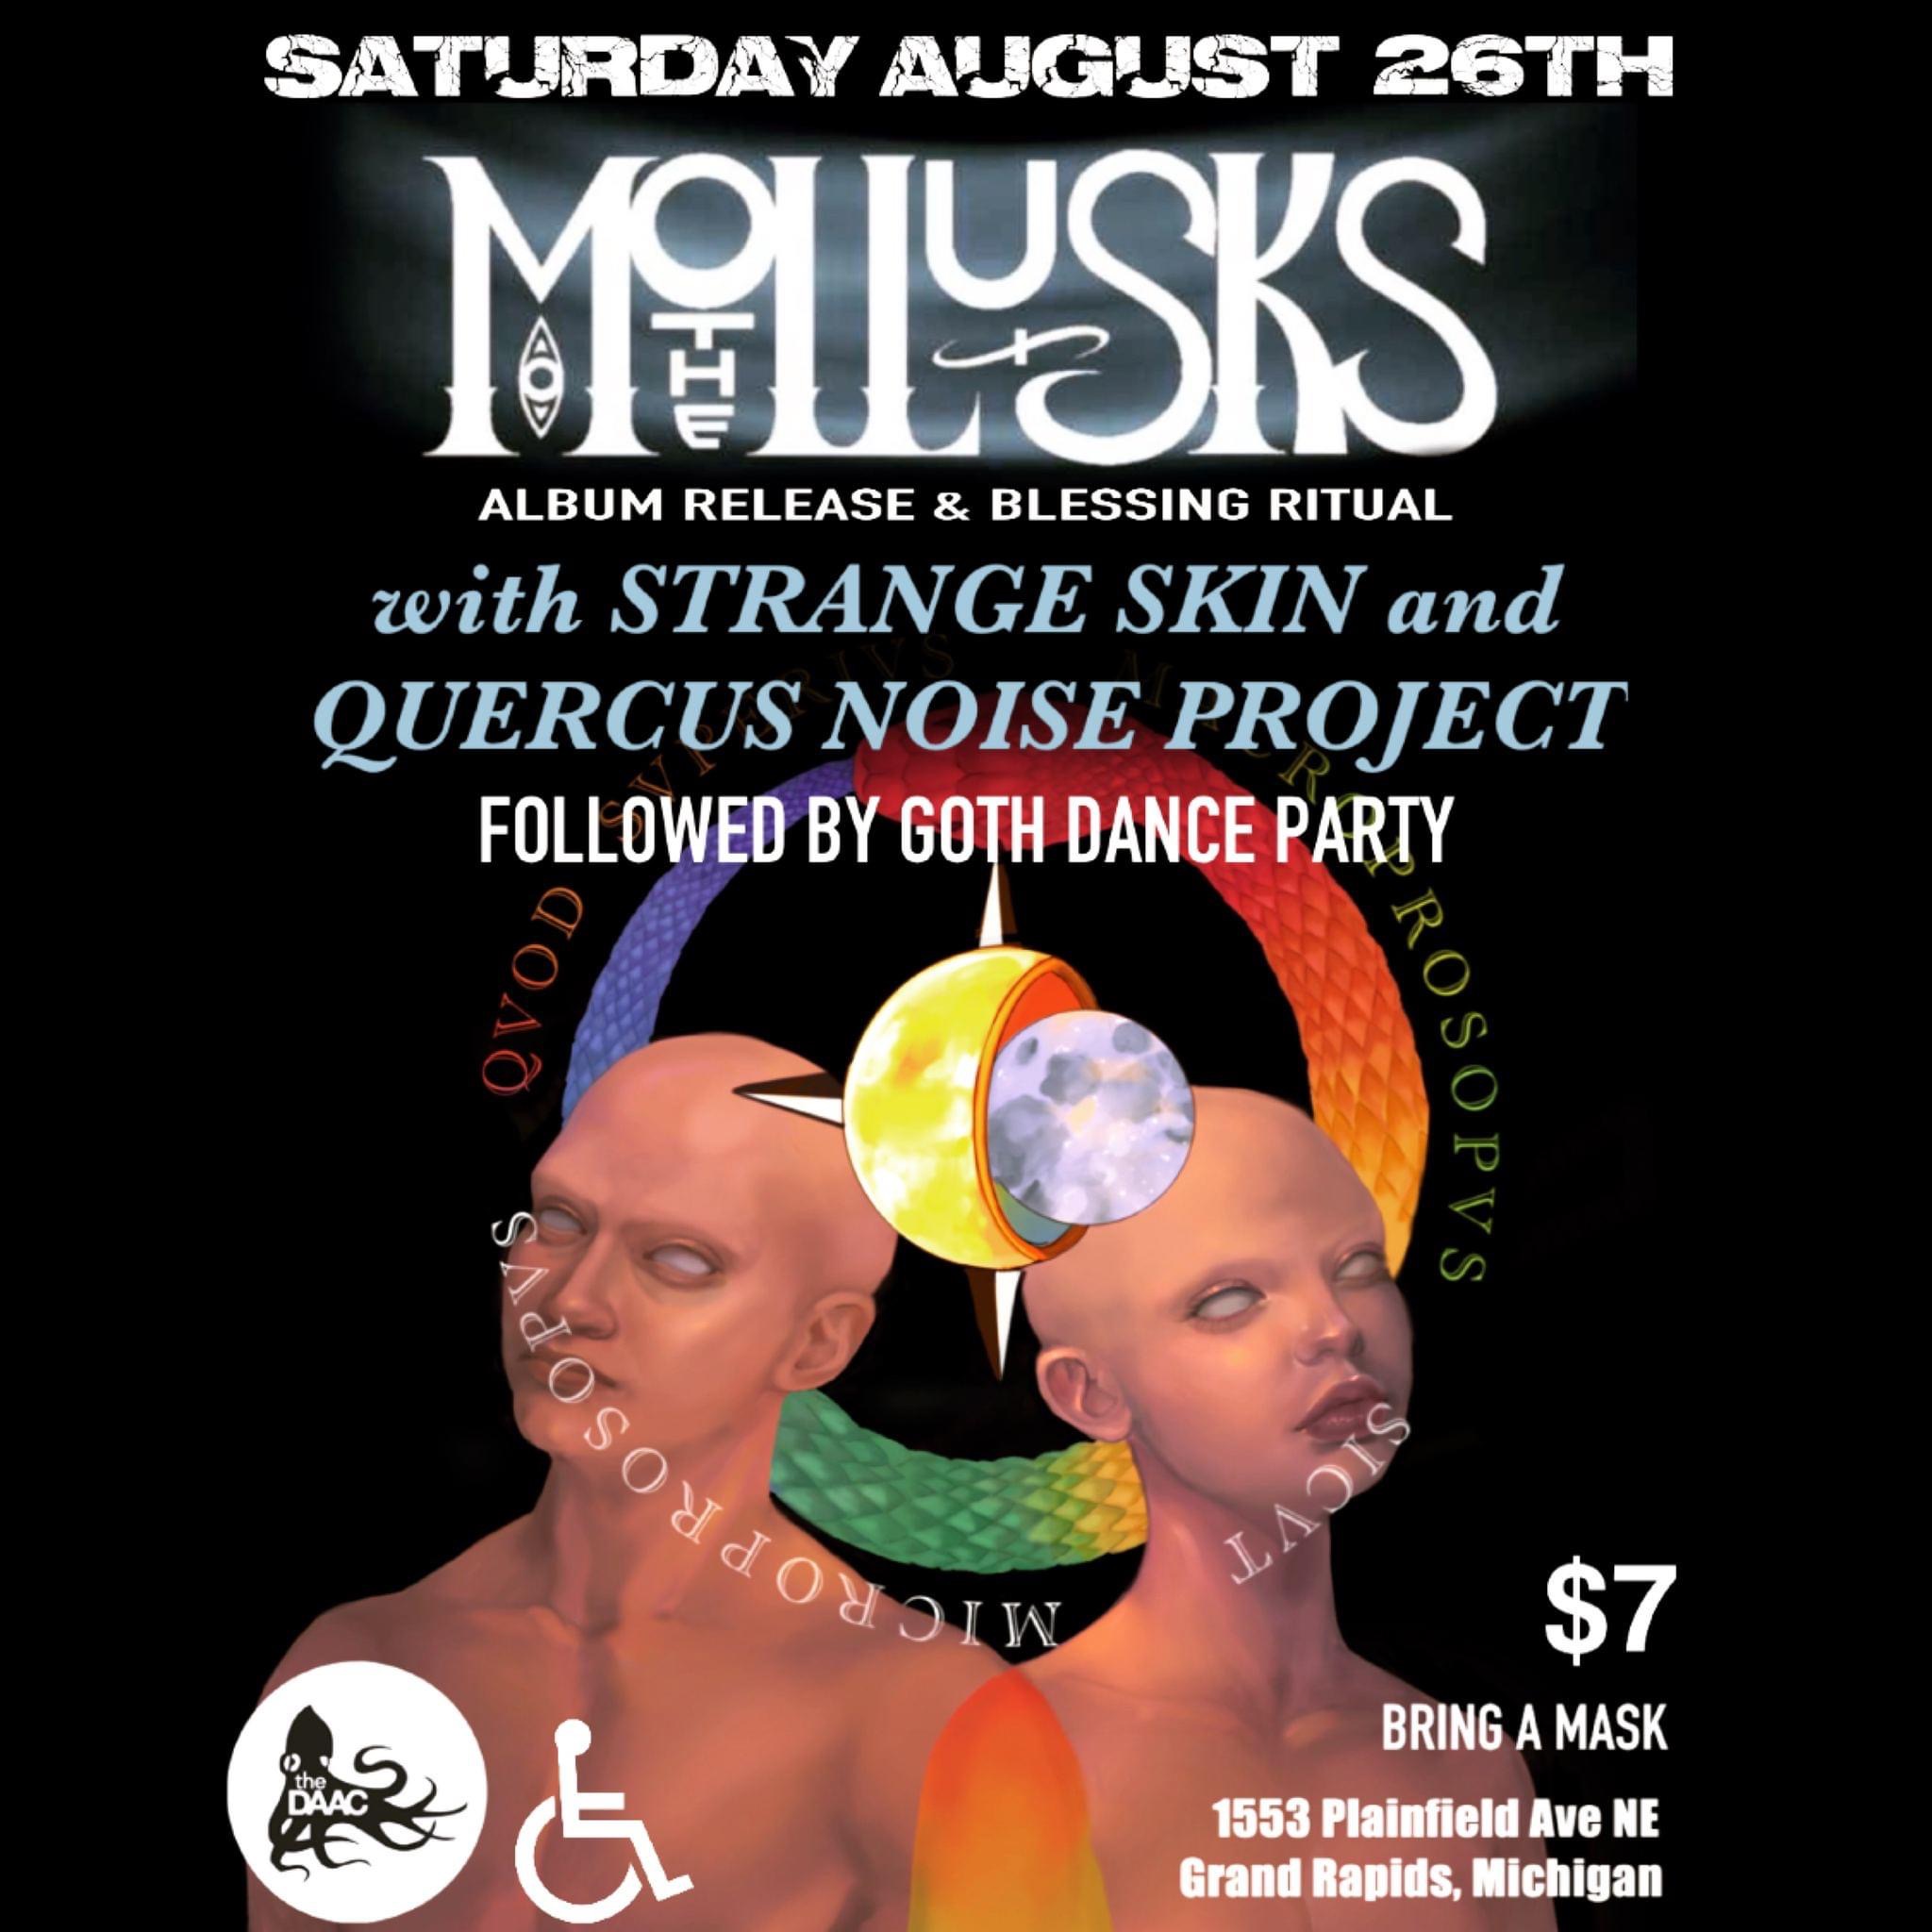 The Mollusks album release and blessing ritual